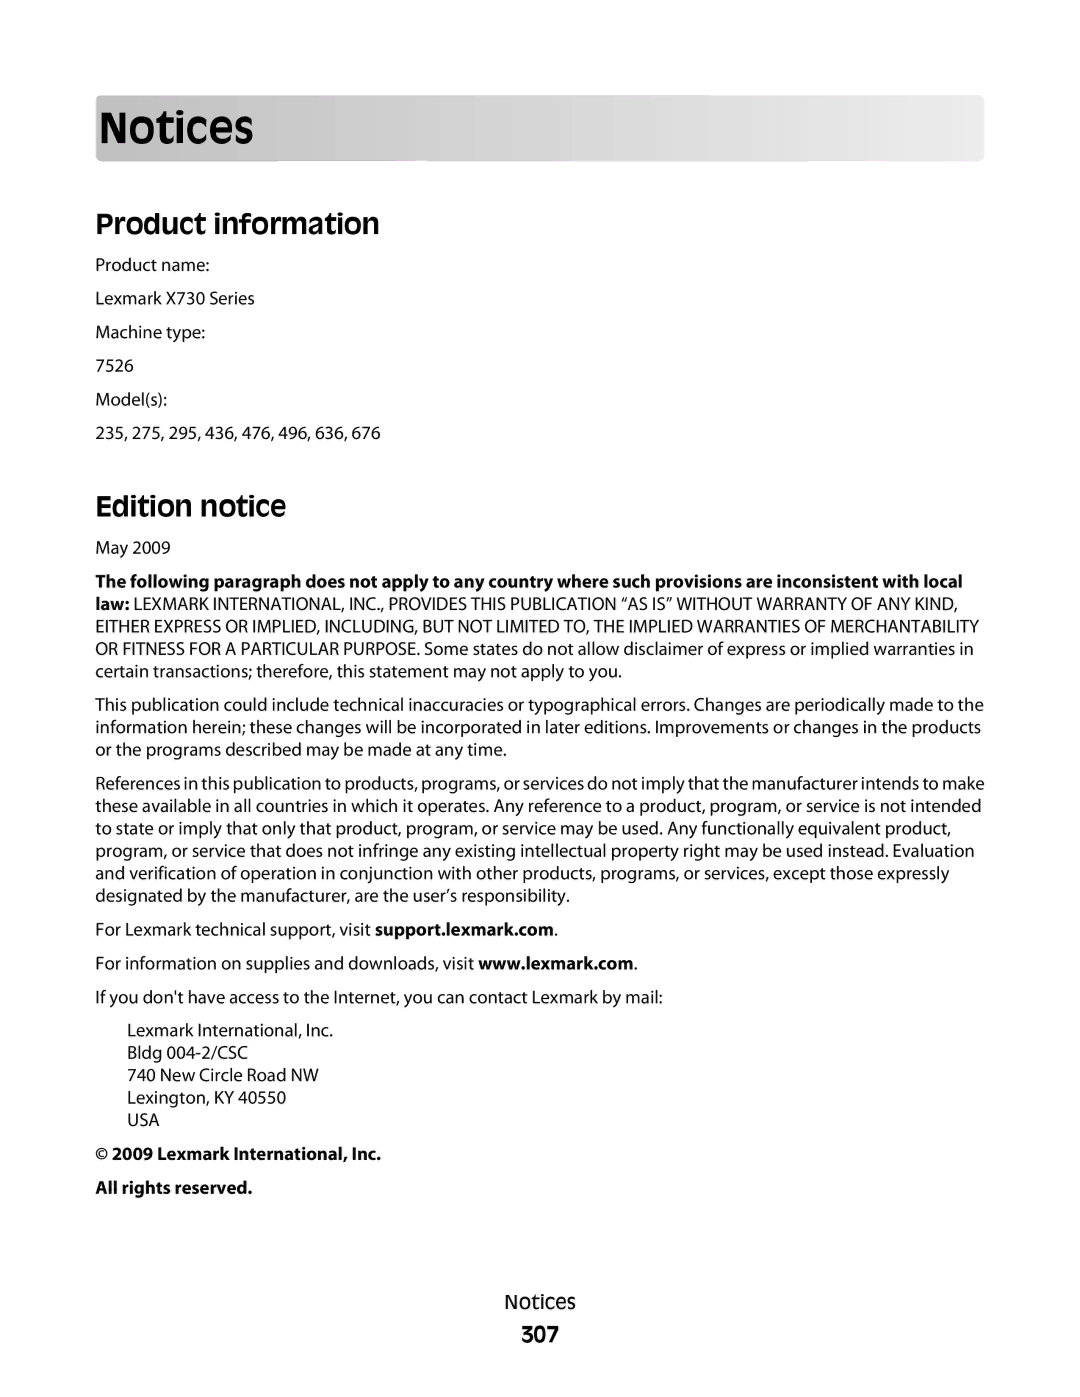 Lexmark MS00855, MS00859, MS00853 Product information, Edition notice, 307, Lexmark International, Inc. All rights reserved 